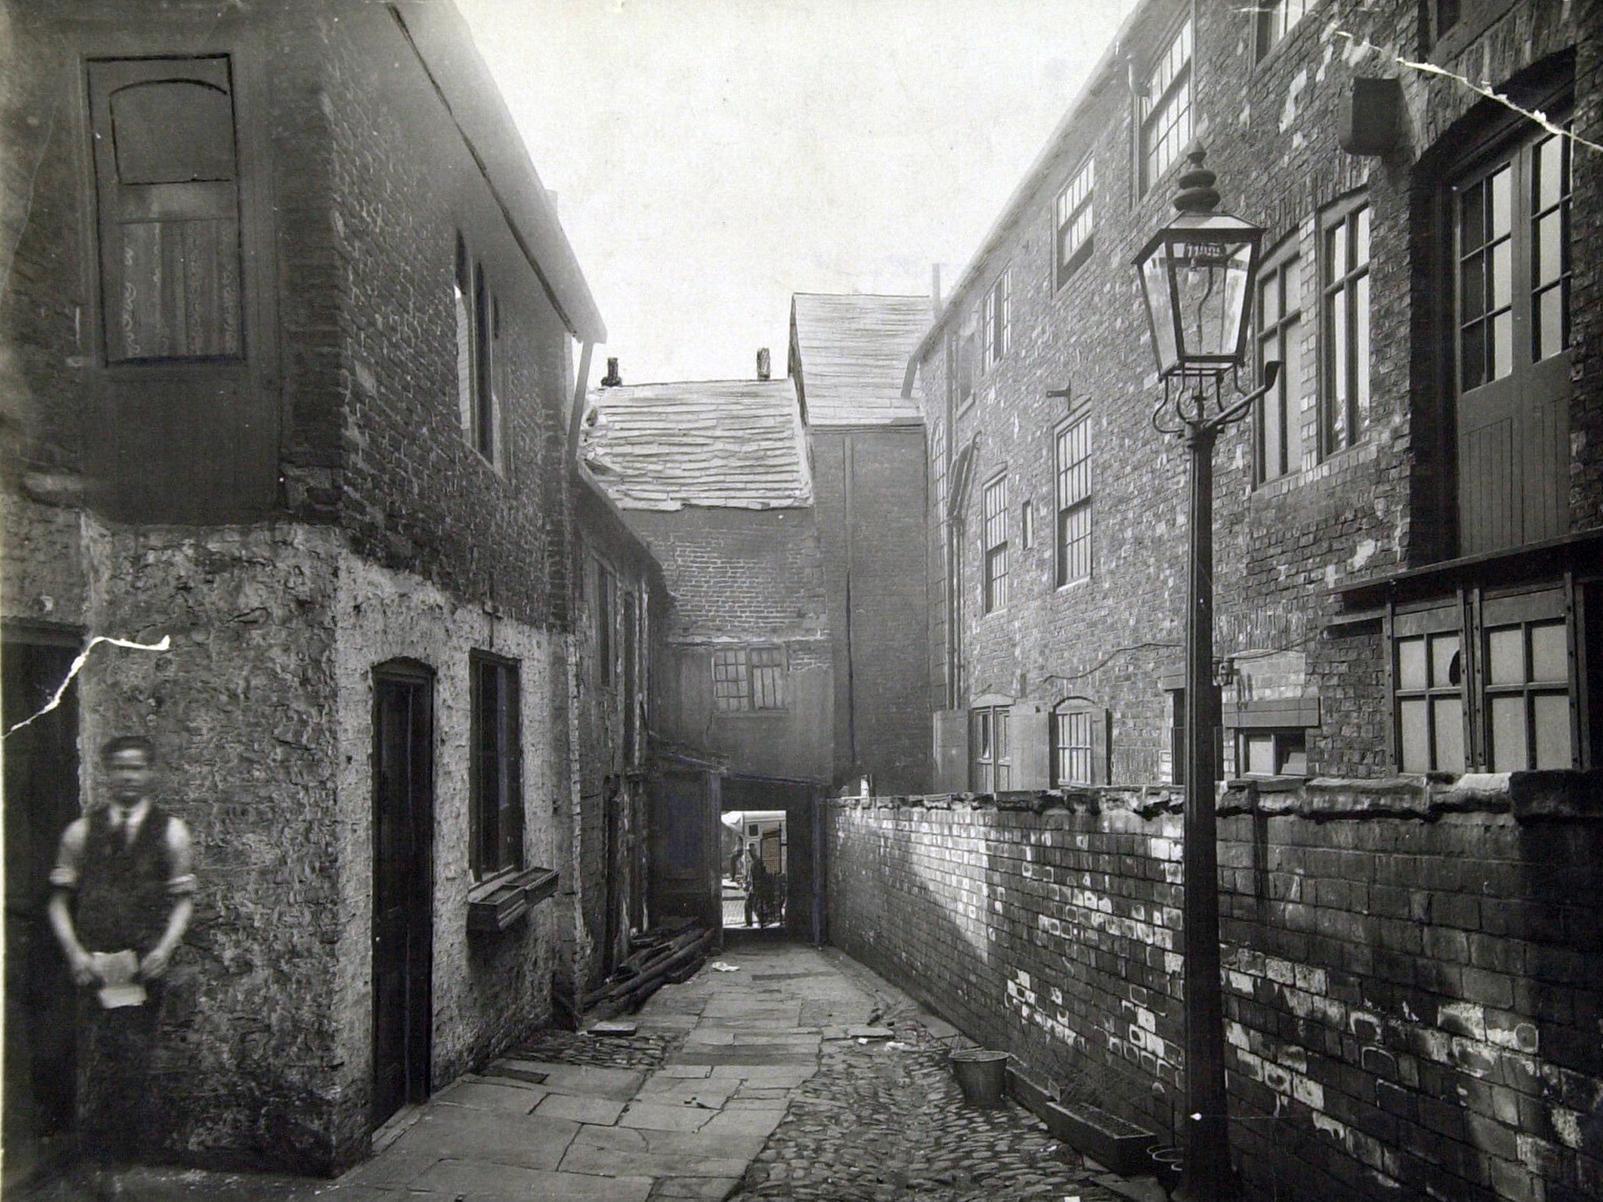 This is King's Arms Yard off Lower Headrow. The narrow alley over the wall was Atkinsons Court. This would be part of the site on which the Odeon Cinema would be built.